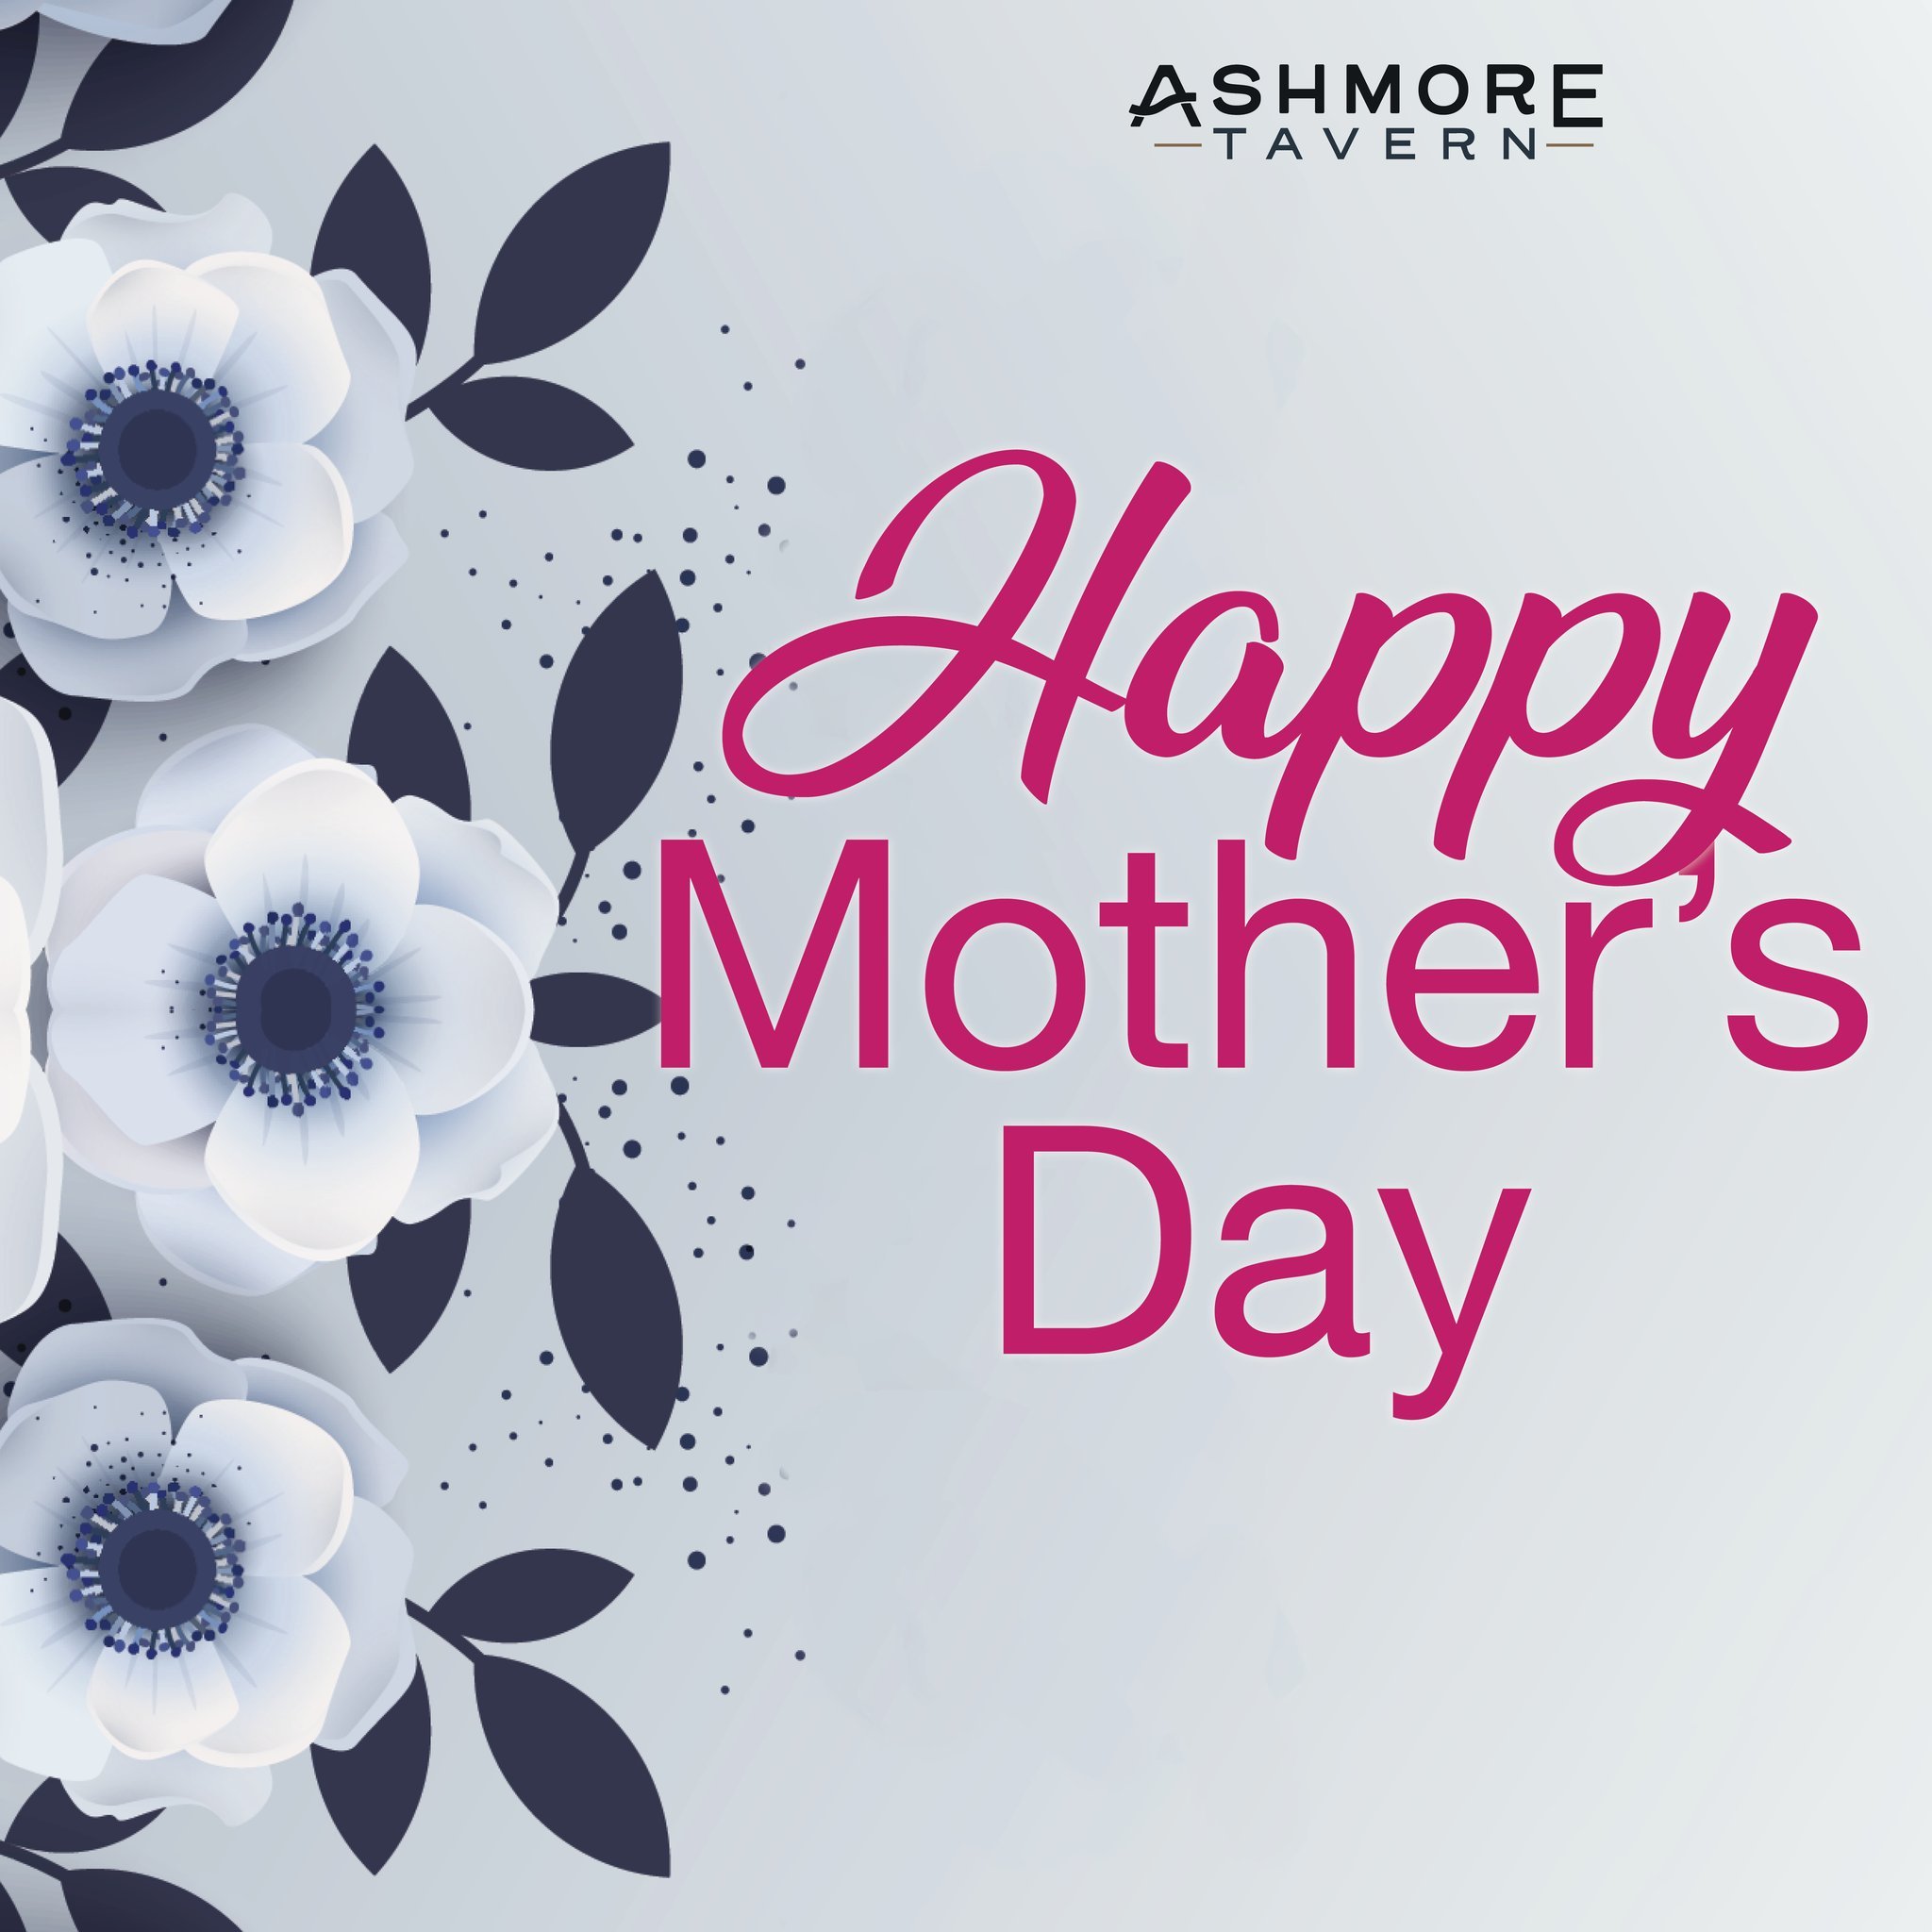 Happy Mother's Day to all the amazing mums out there! 💐

Celebrate this special day with us at Ashmore Tavern.

Treat Mum to our chef&rsquo;s dessert special, kids face painting, $5* kids meals, and a complimentary glass of bubbly.

Cheers to you, M